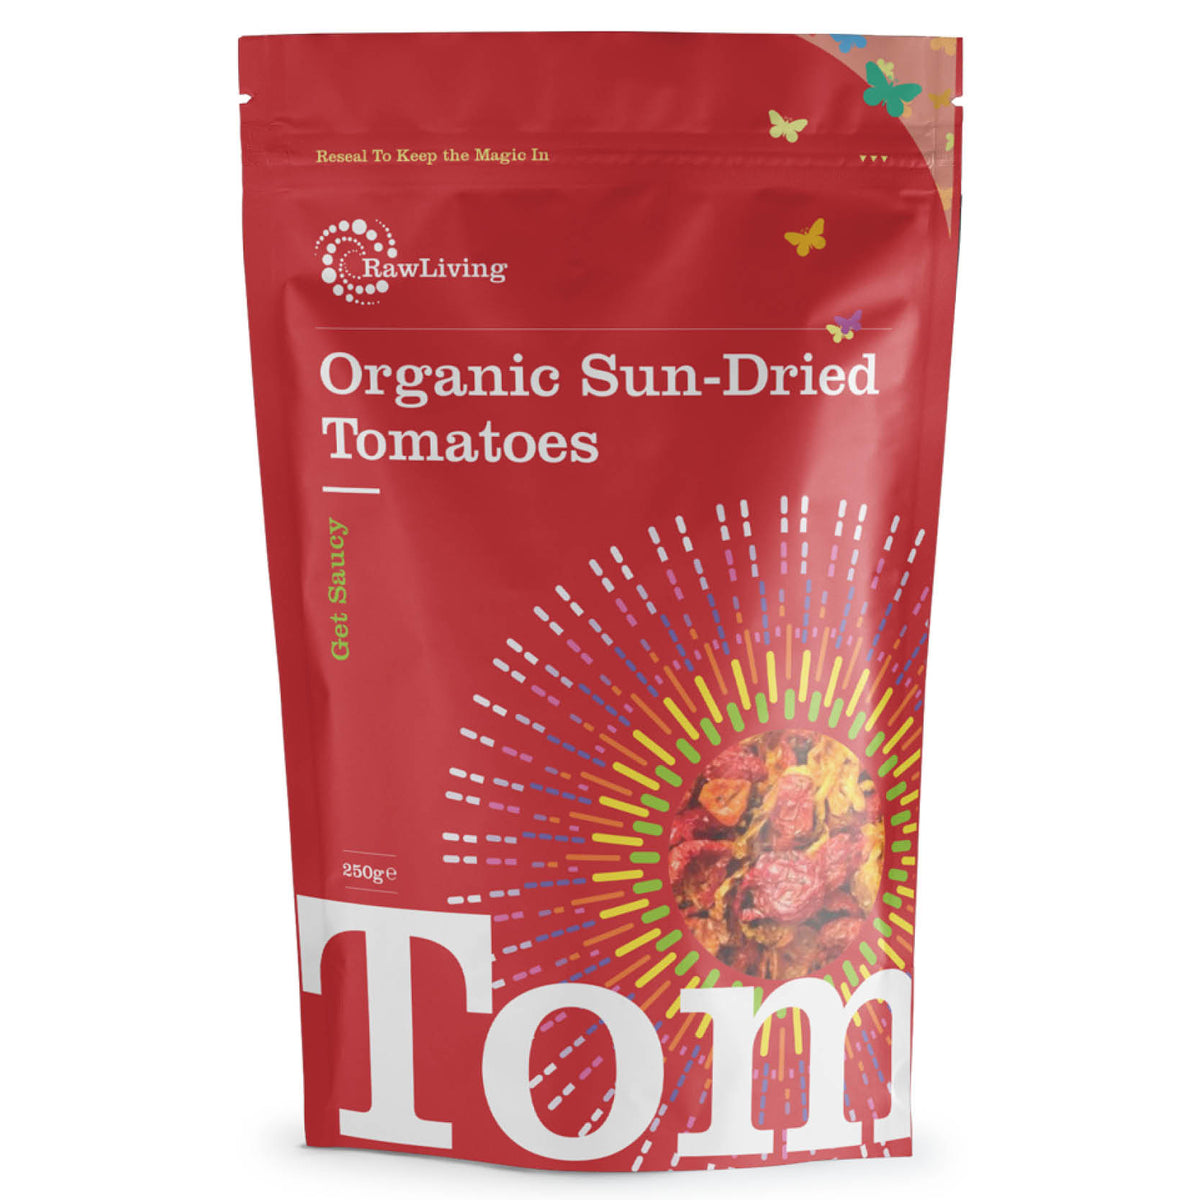 Organic Sun Dried Tomatoes | Raw Living UK | Raw Foods | Raw Living Organic Sun Dried Tomatoes: these are the tastiest Premium Sun-Dried Tomatoes we could find. Use for a range of culinary creations, including sauces.